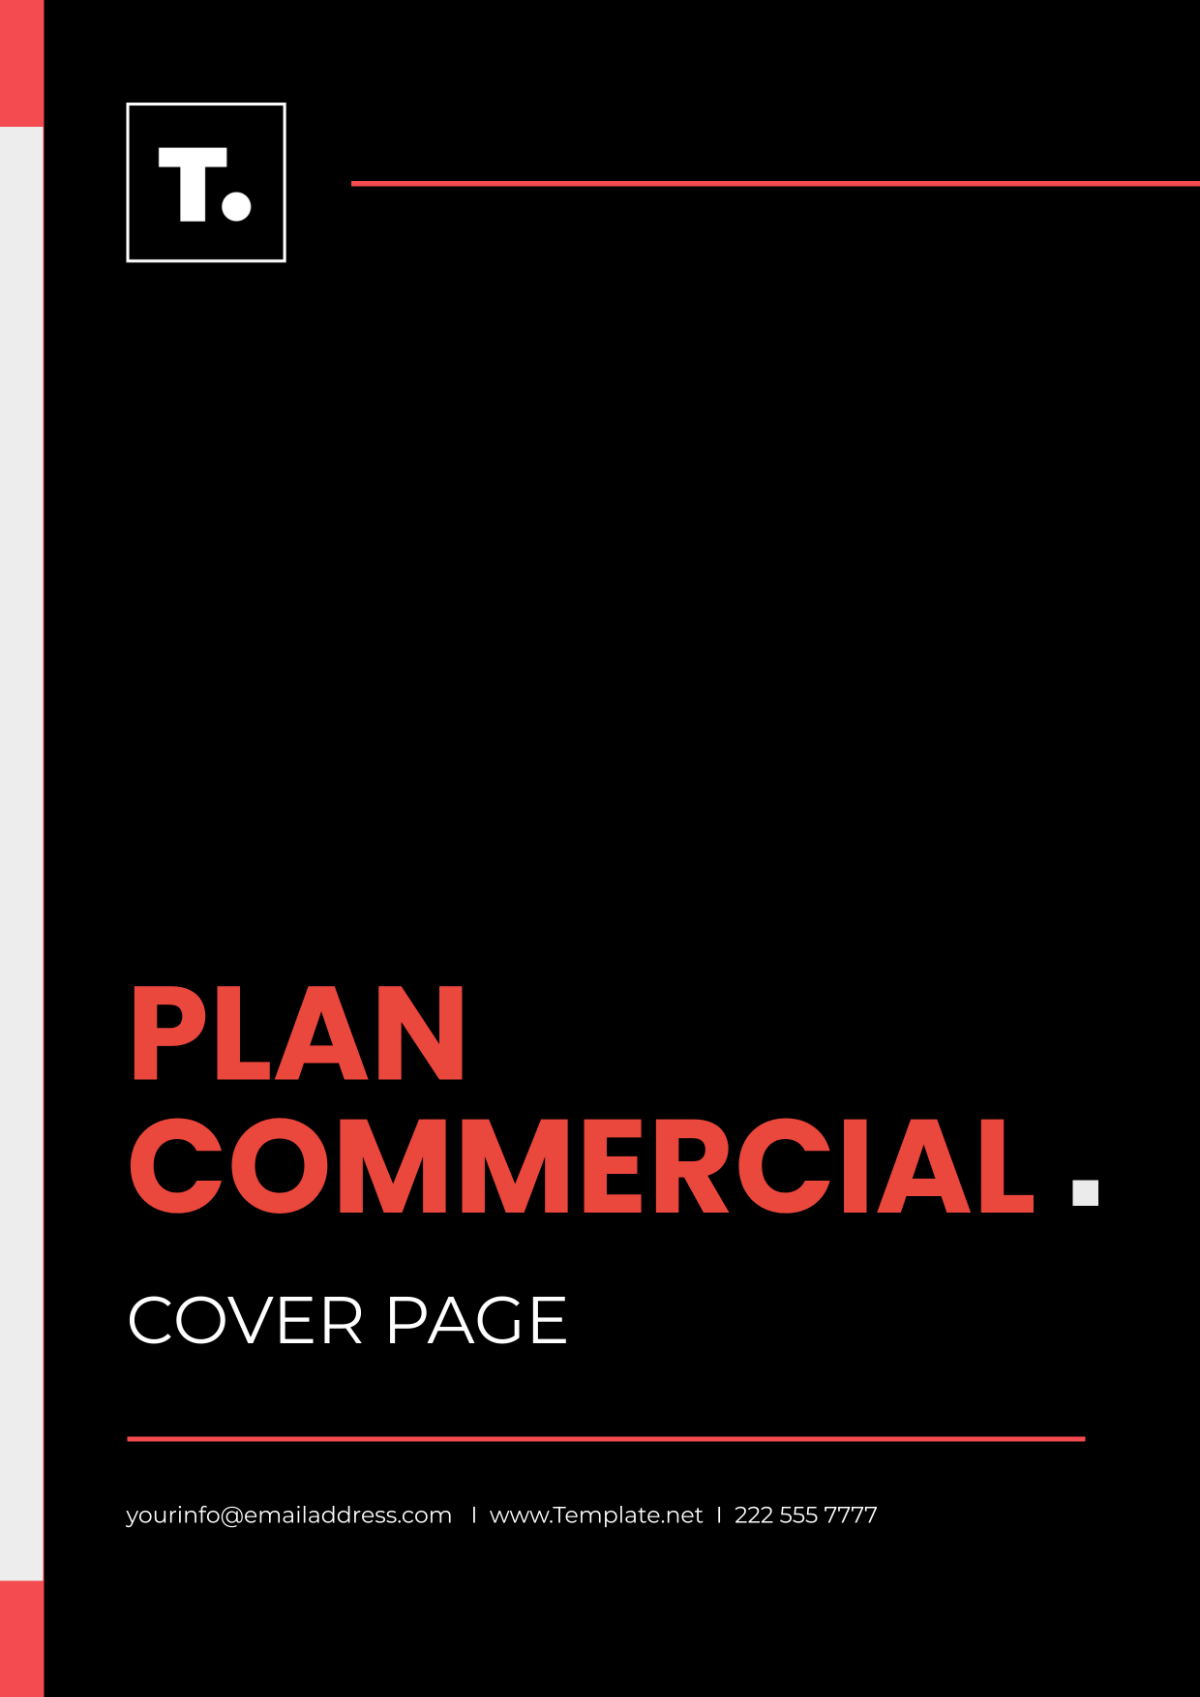 Plan Commercial Cover Page Template